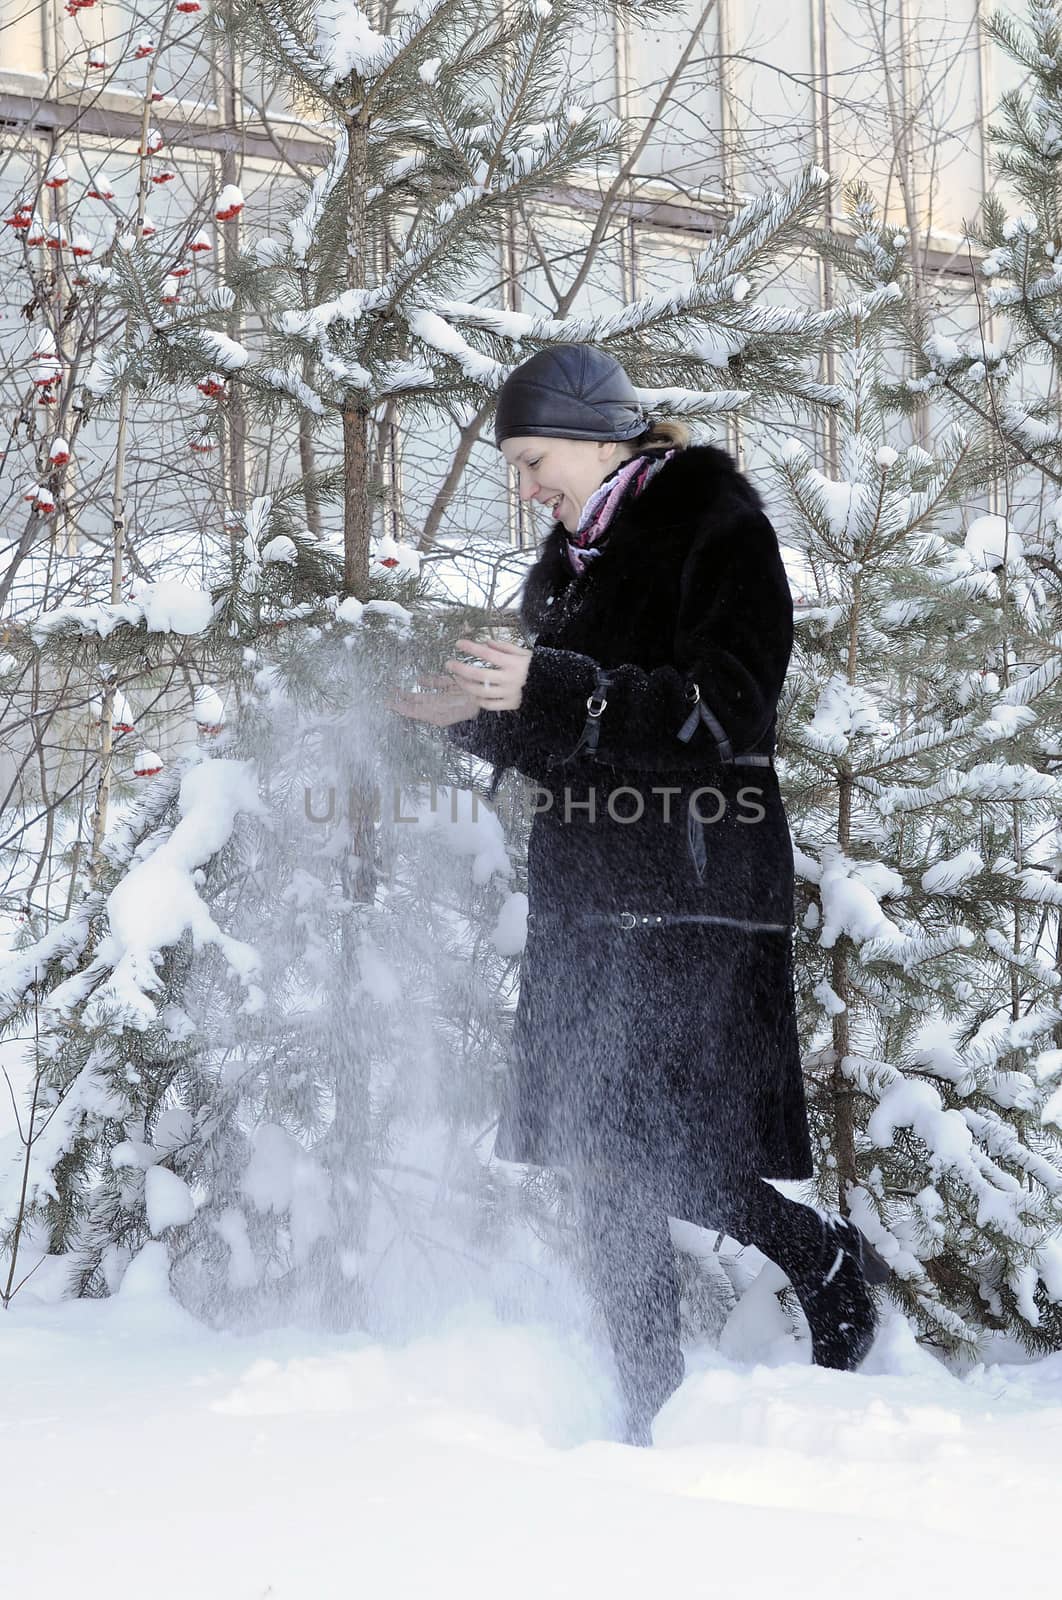 The cheerful woman in a black fur coat costs at snow-covered pin by veronka72